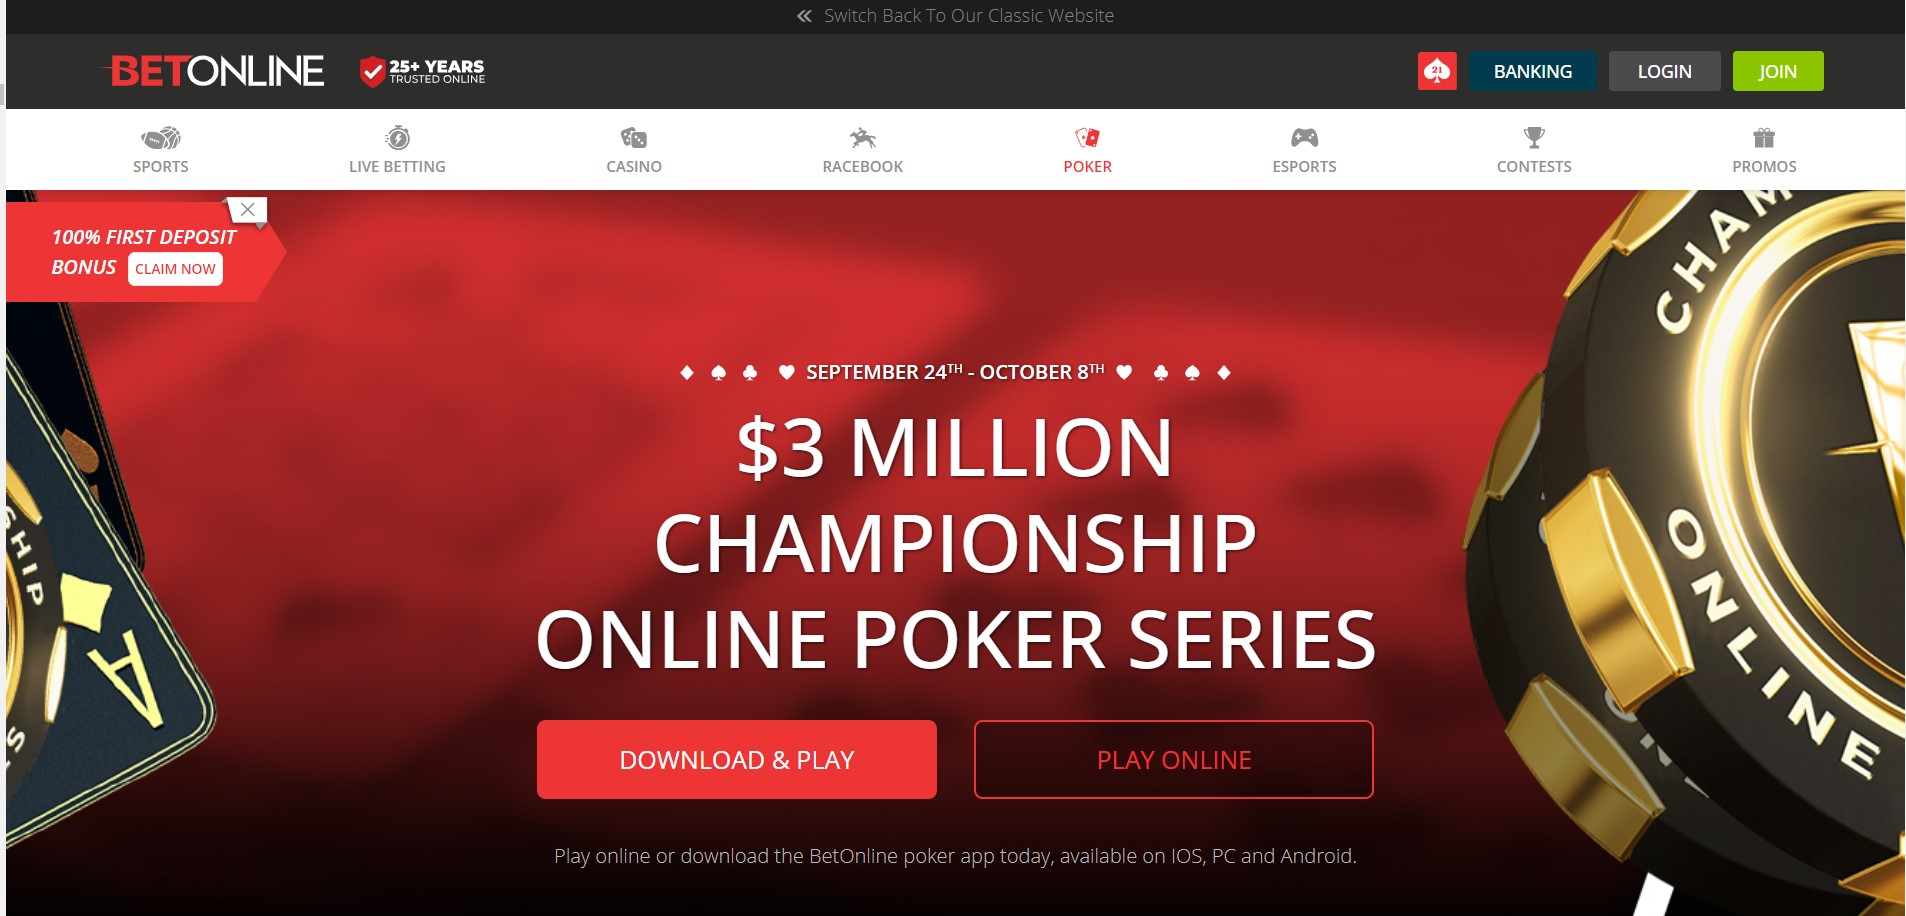 Delaware Launches Free Online Poker Game on Facebook; Real-Money